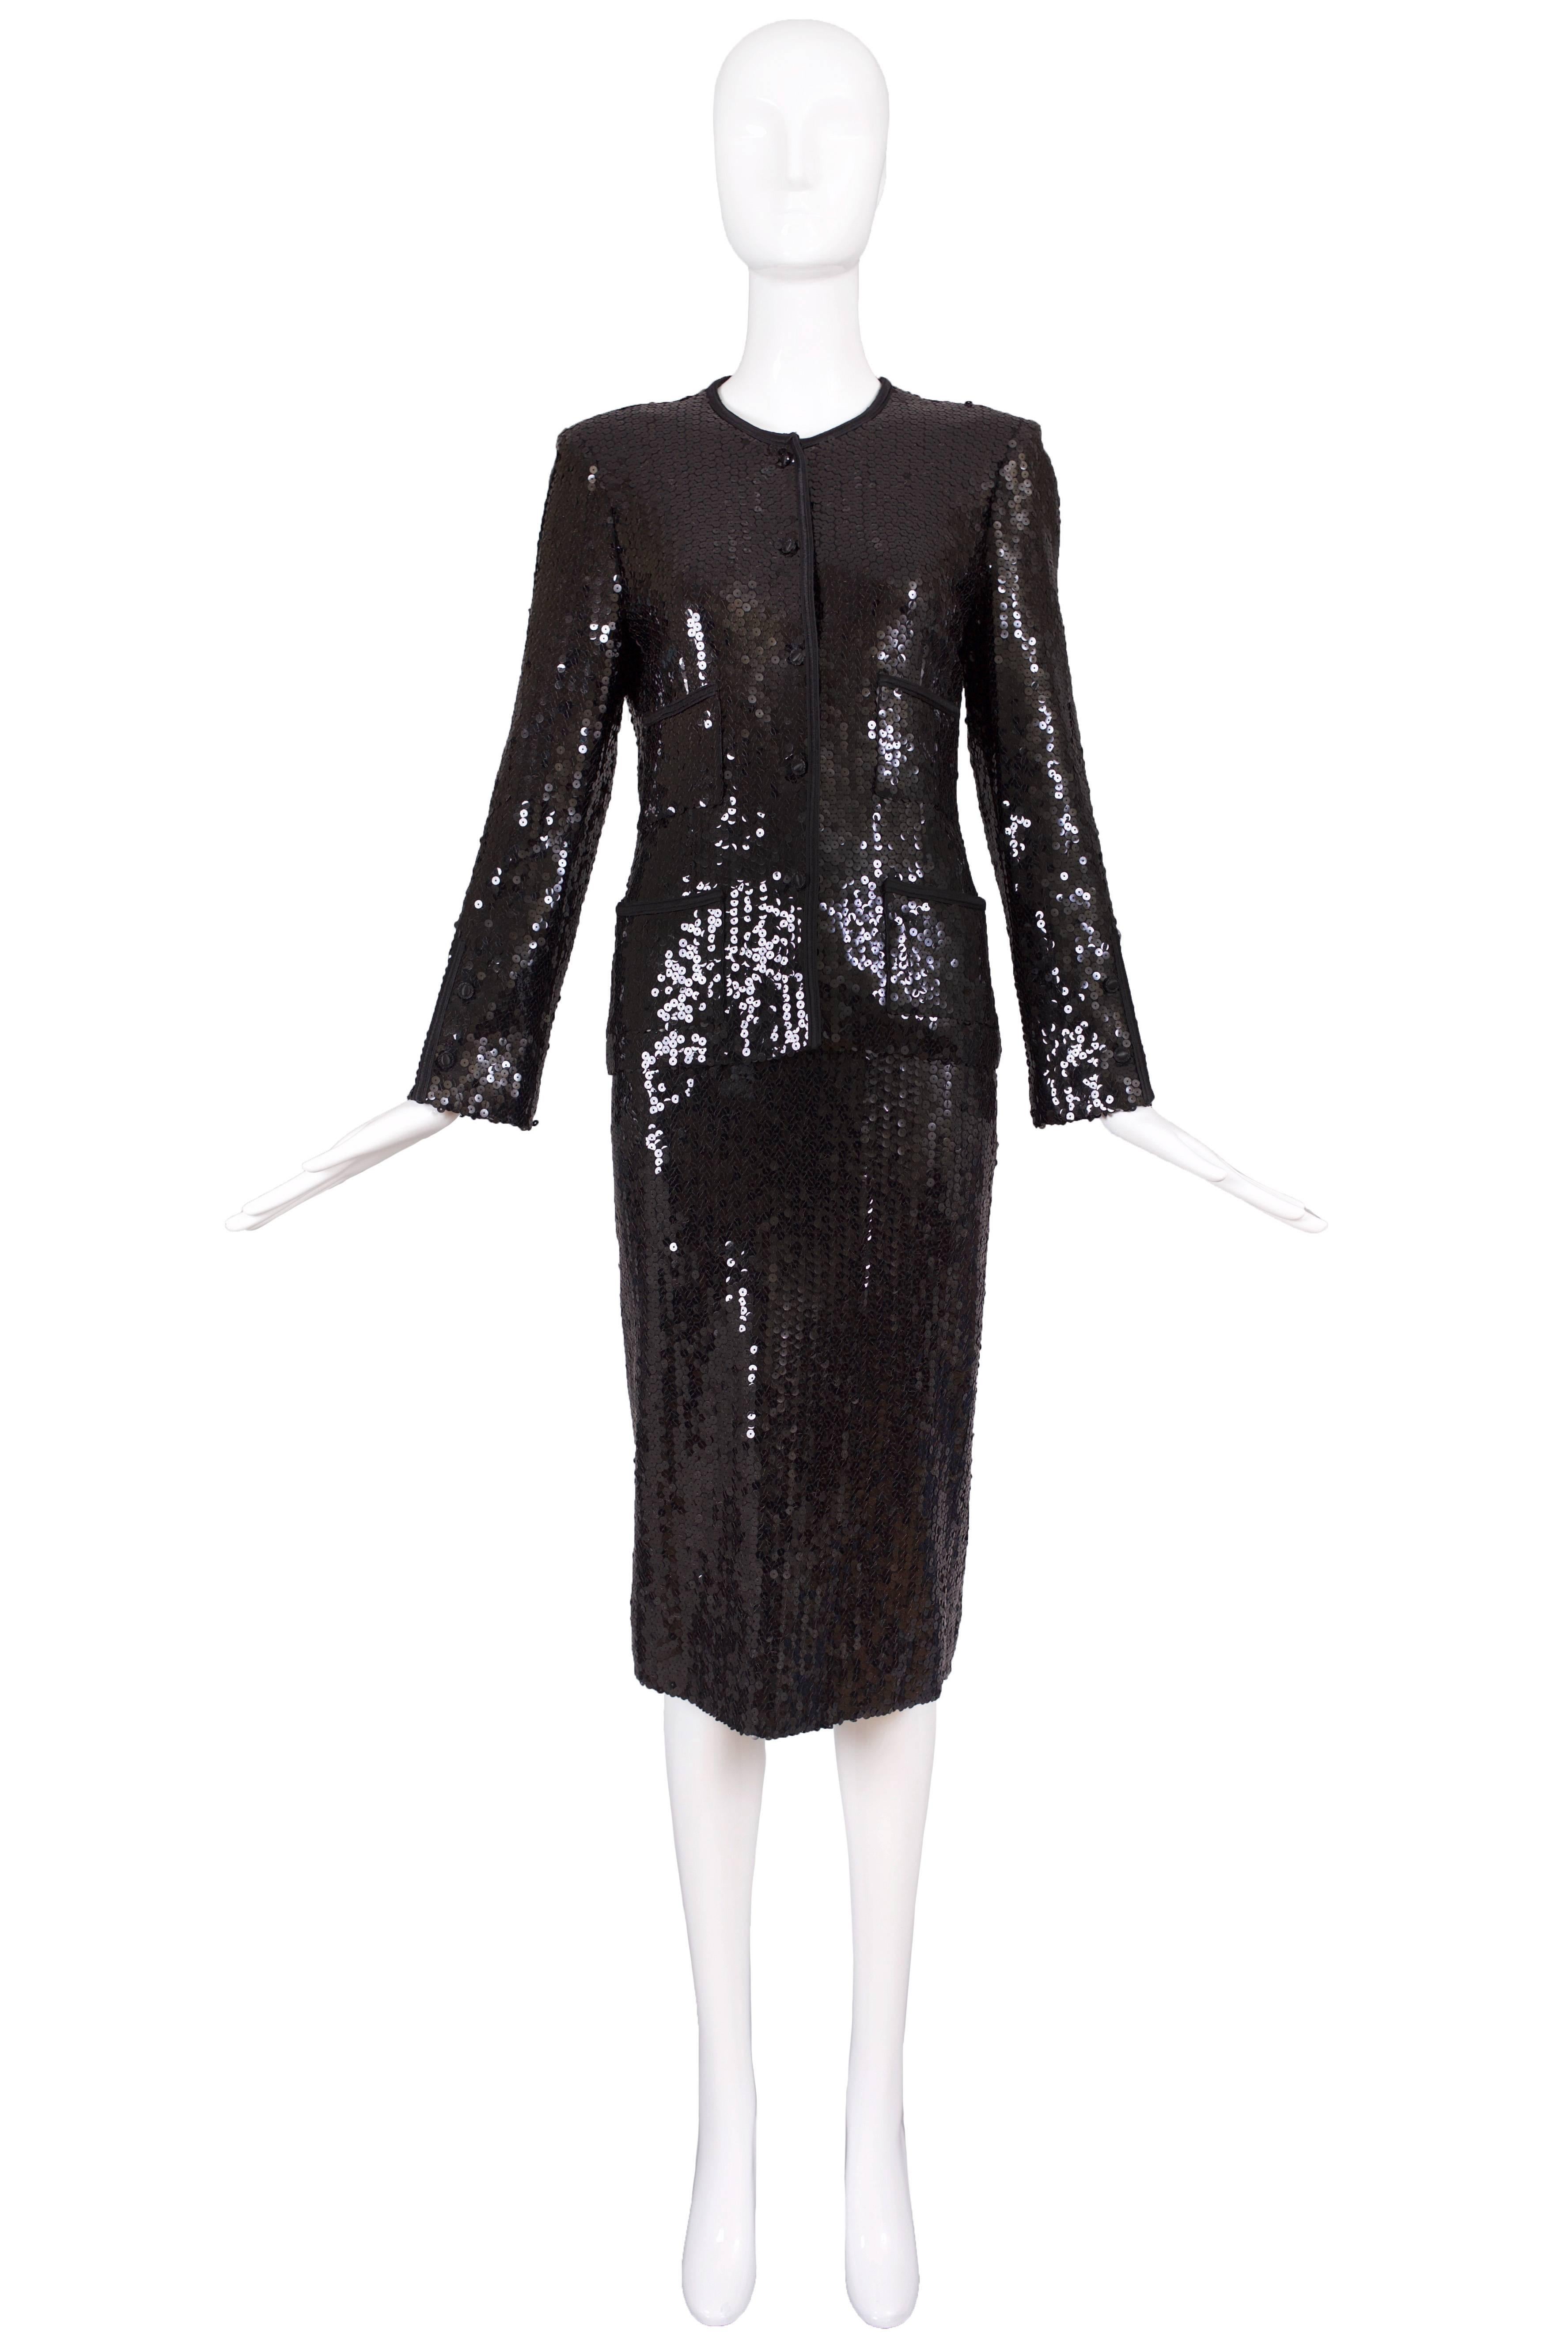 1982/1983 Chanel black sequin suit comprised of a jacket and knee-length straight skirt. Jacket buttons up the front and features four frontal pockets. Both top and bottom entirely lined in silk. Labeled Chanel. Size 40. In excellent condition with